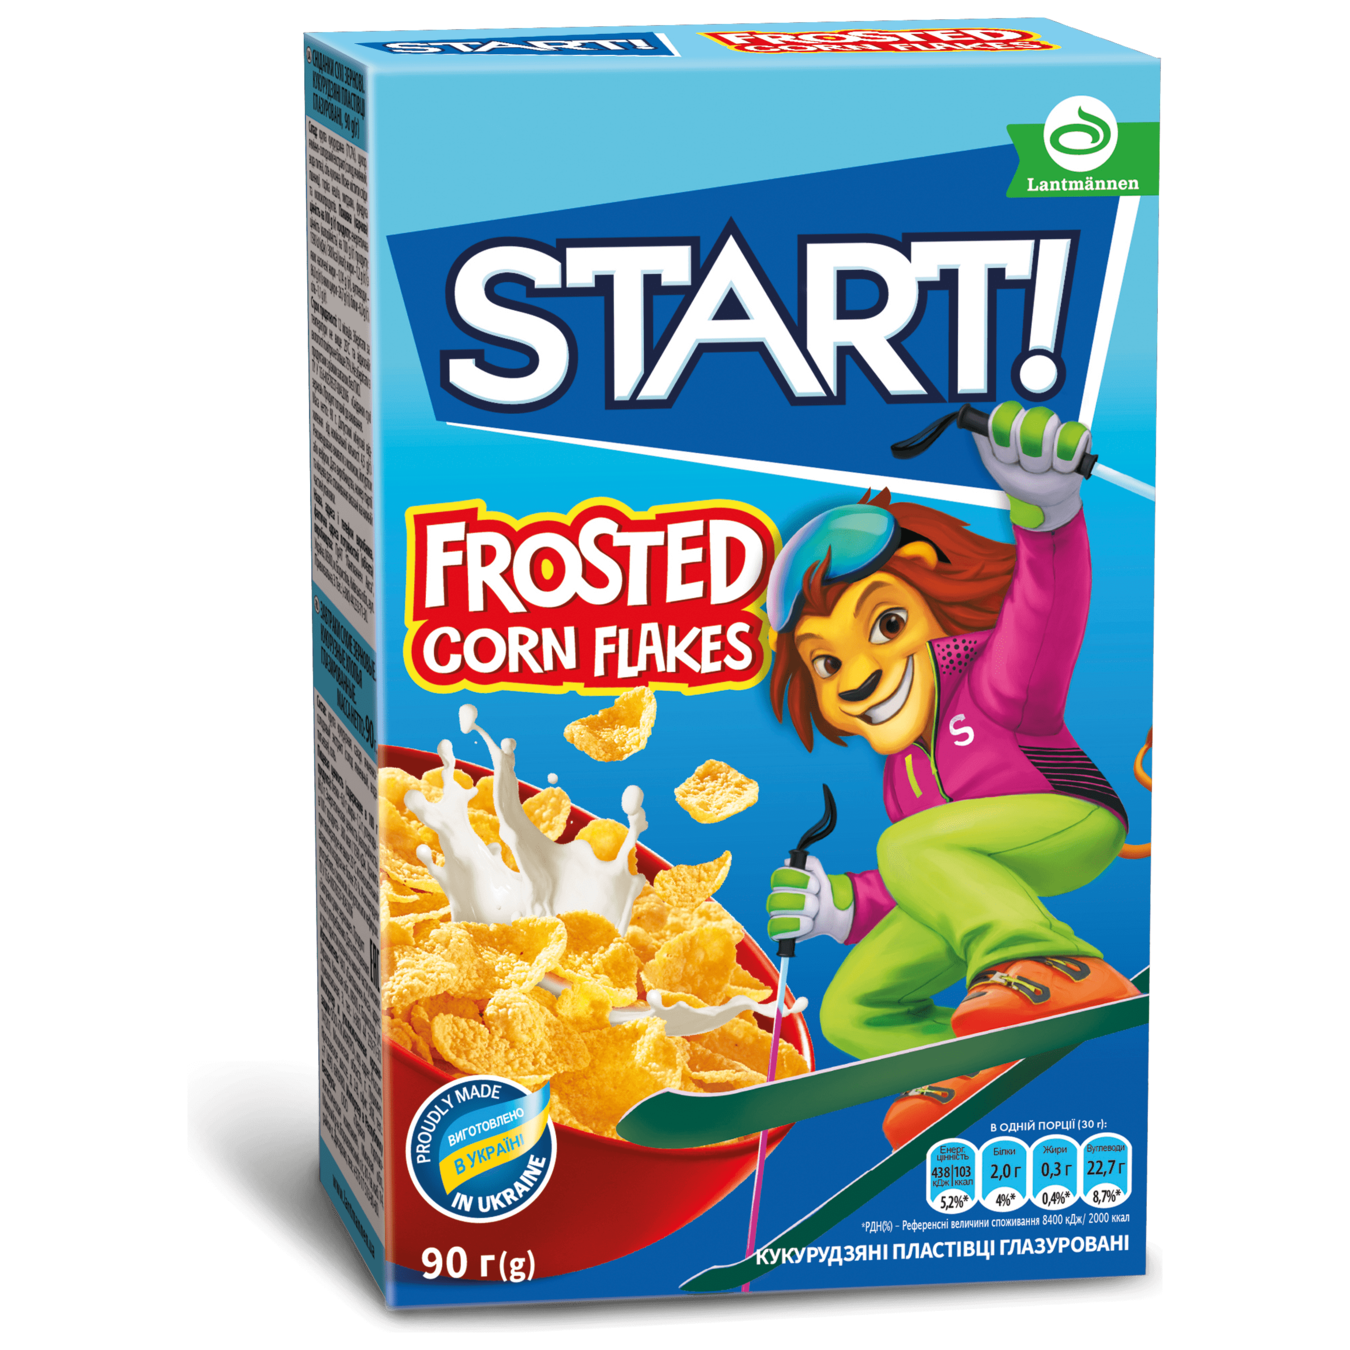 Start! Frosted Corn Flakes Dry Breakfast 90g